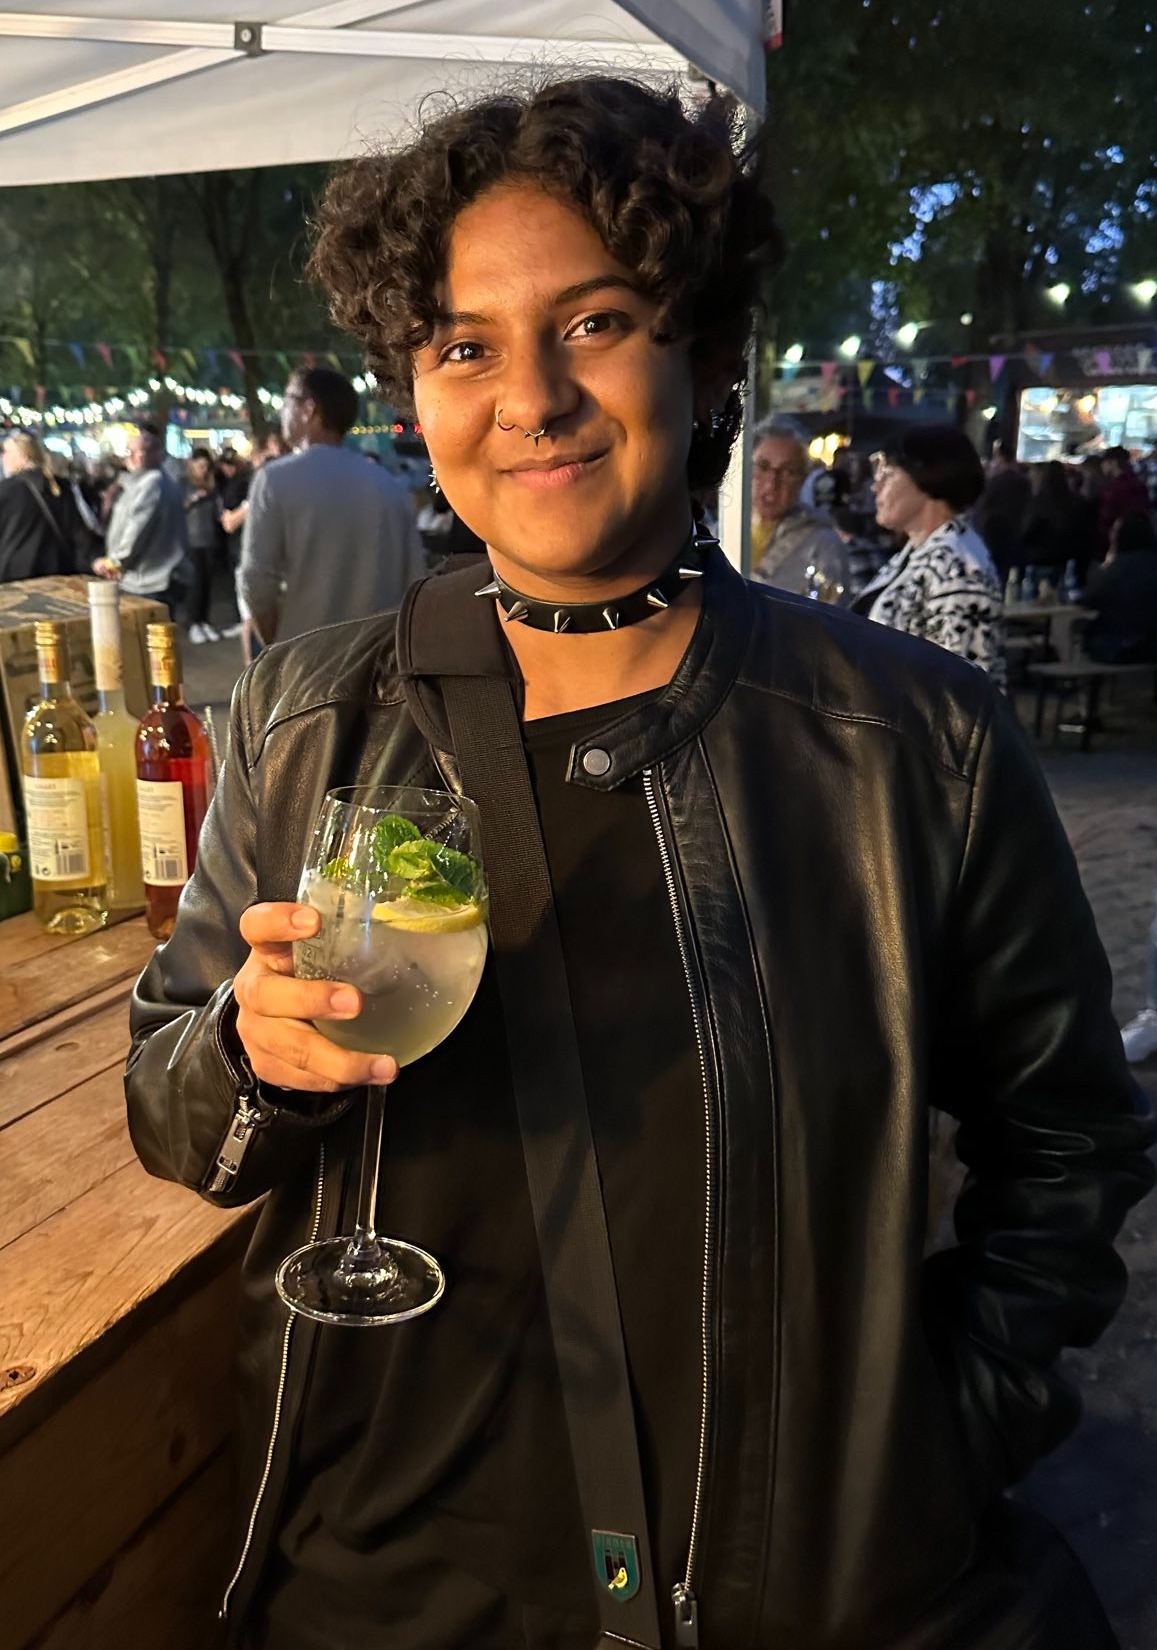 Vagrant, a brown-skinned person with short curly black hair, smiles at the camera. They are wearing all-black clothes, a black leather jacket, and a leather choker with spikes. Their hand holds a mocktail in a wine glass.